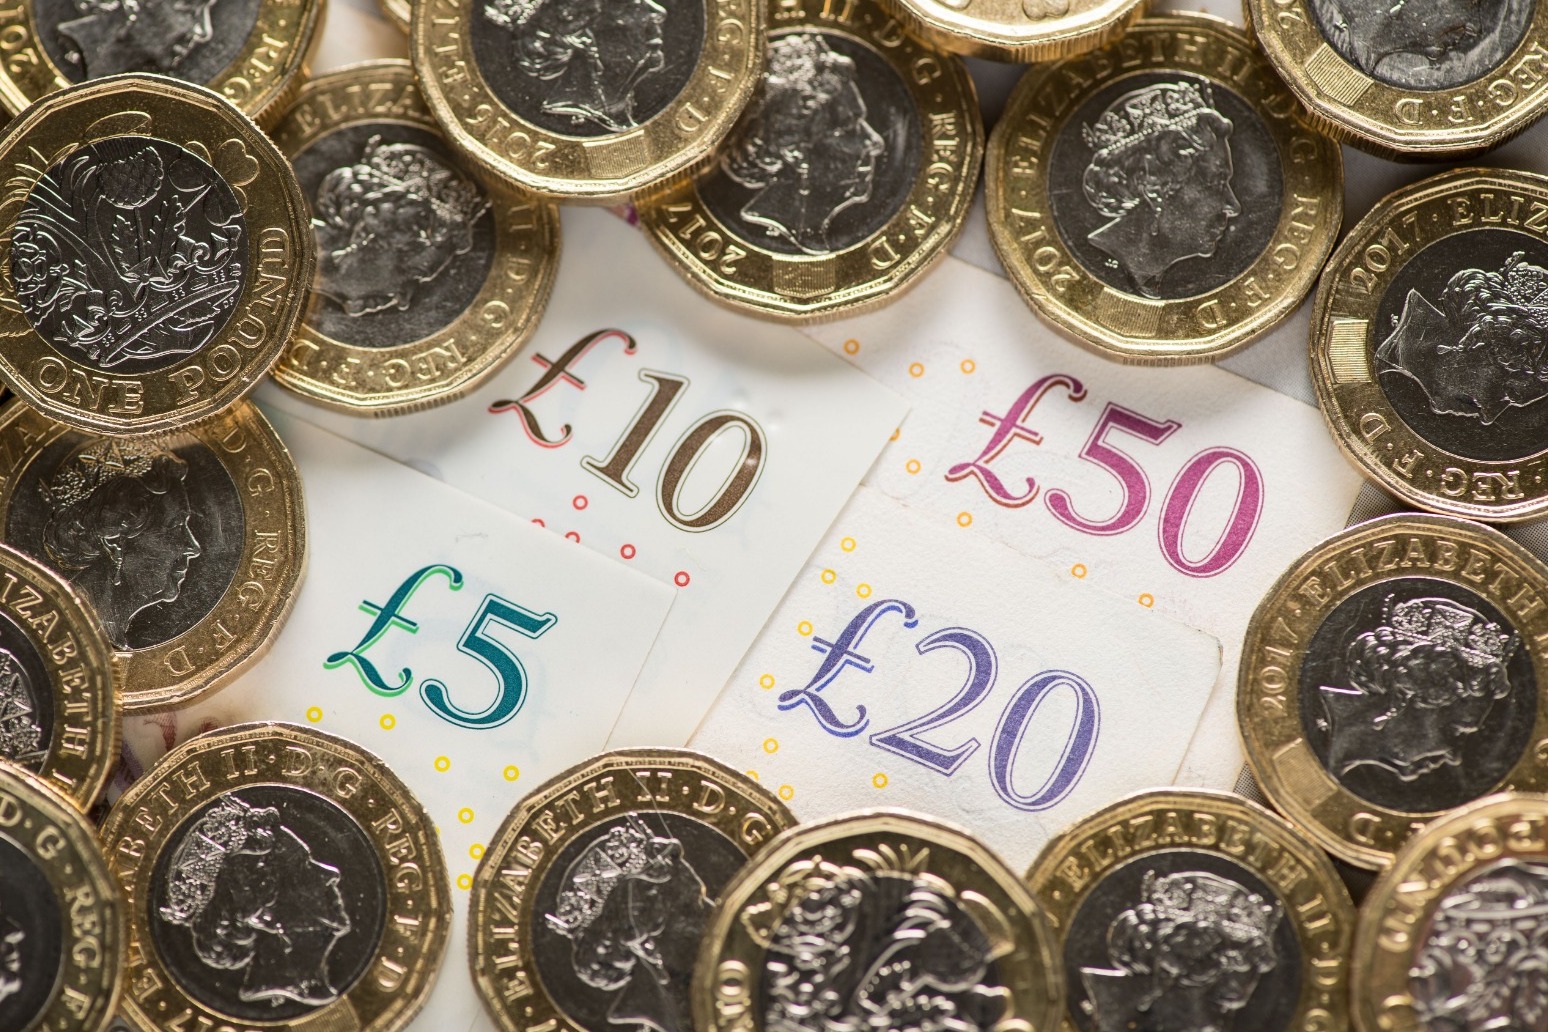 New research sparks ‘creeping non-acceptance’ concerns about cash 